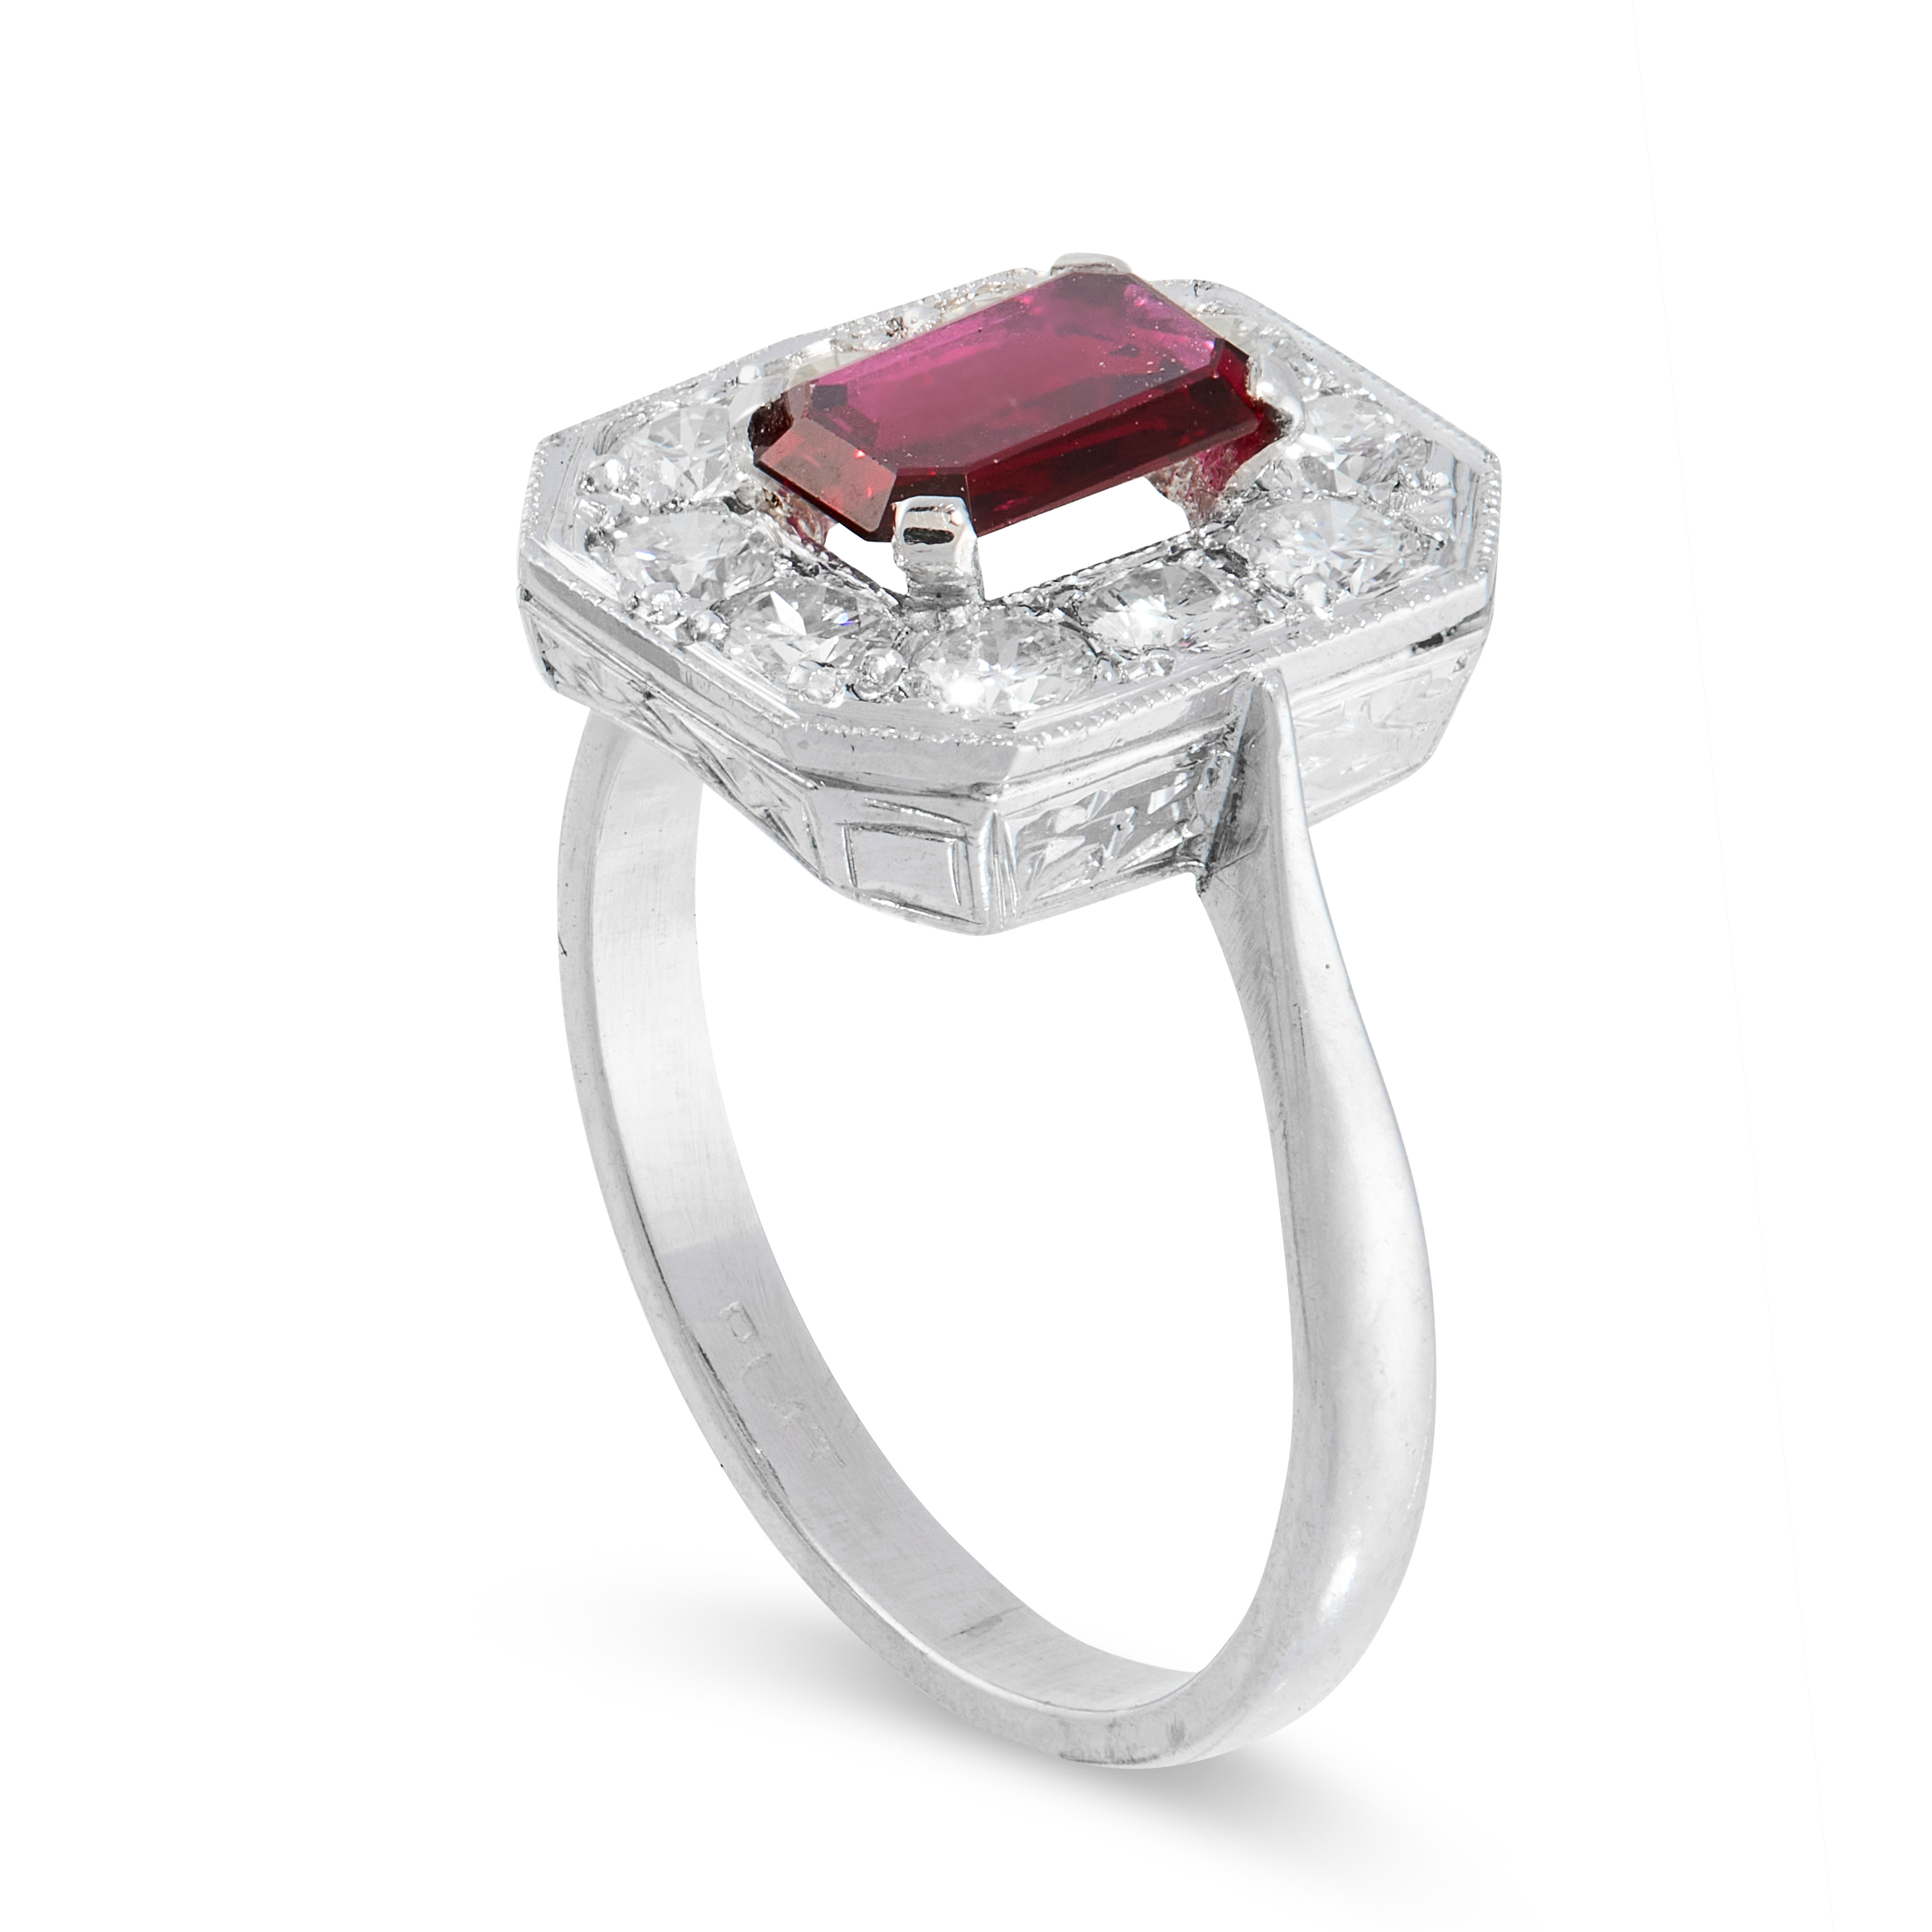 A RUBY AND DIAMOND DRESS RING in platinum, set with an emerald cut ruby of 0.85 carats, within a - Image 2 of 2